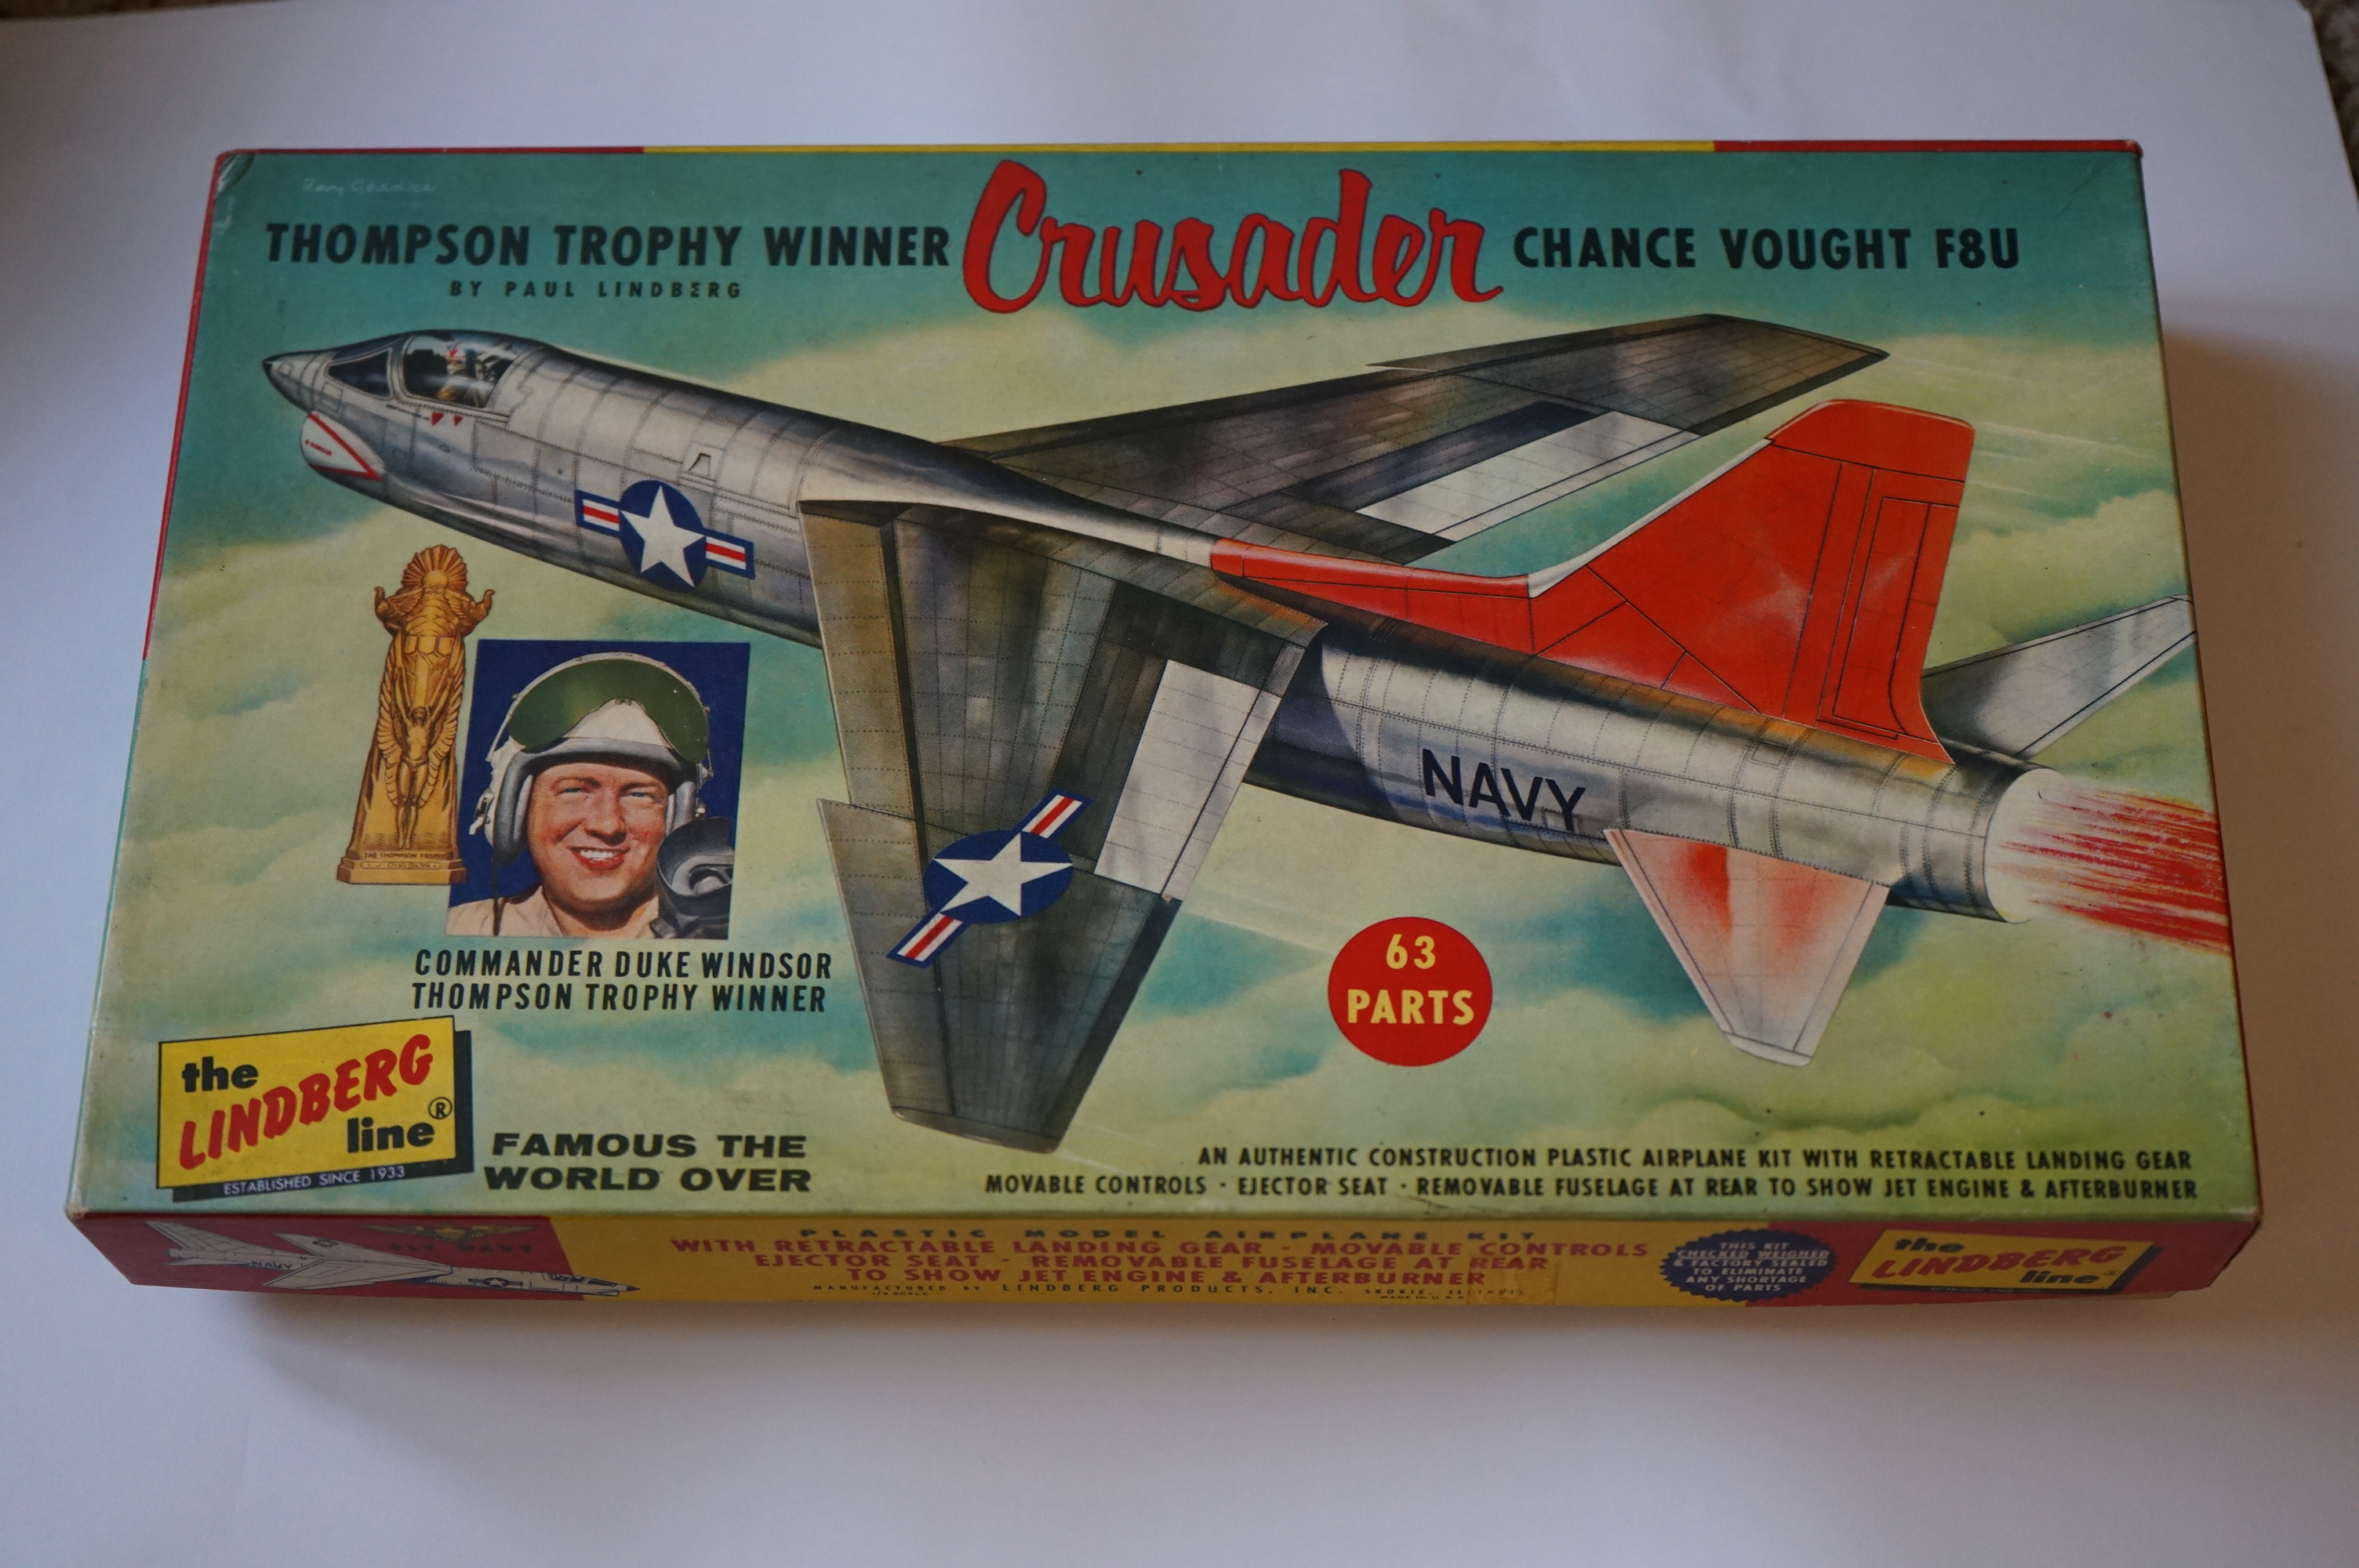 [Academy] 1/72 - Vought F-8 Crusader  - Page 6 1903120616477952916155895